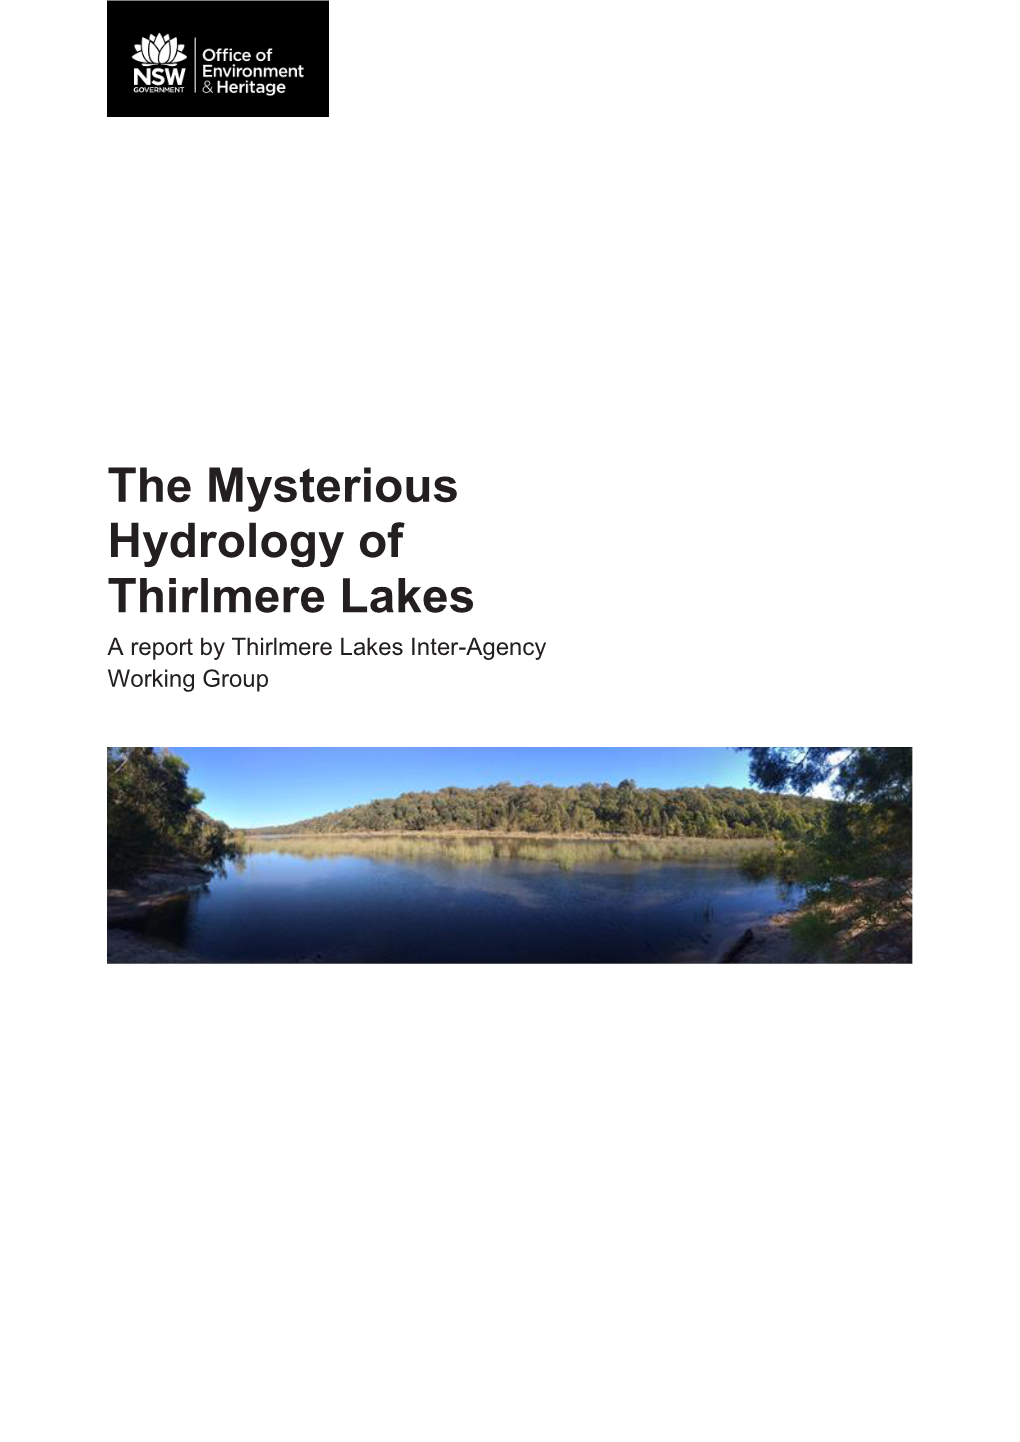 The Mysterious Hydrology of Thirlmere Lakes a Report by Thirlmere Lakes Inter-Agency Working Group